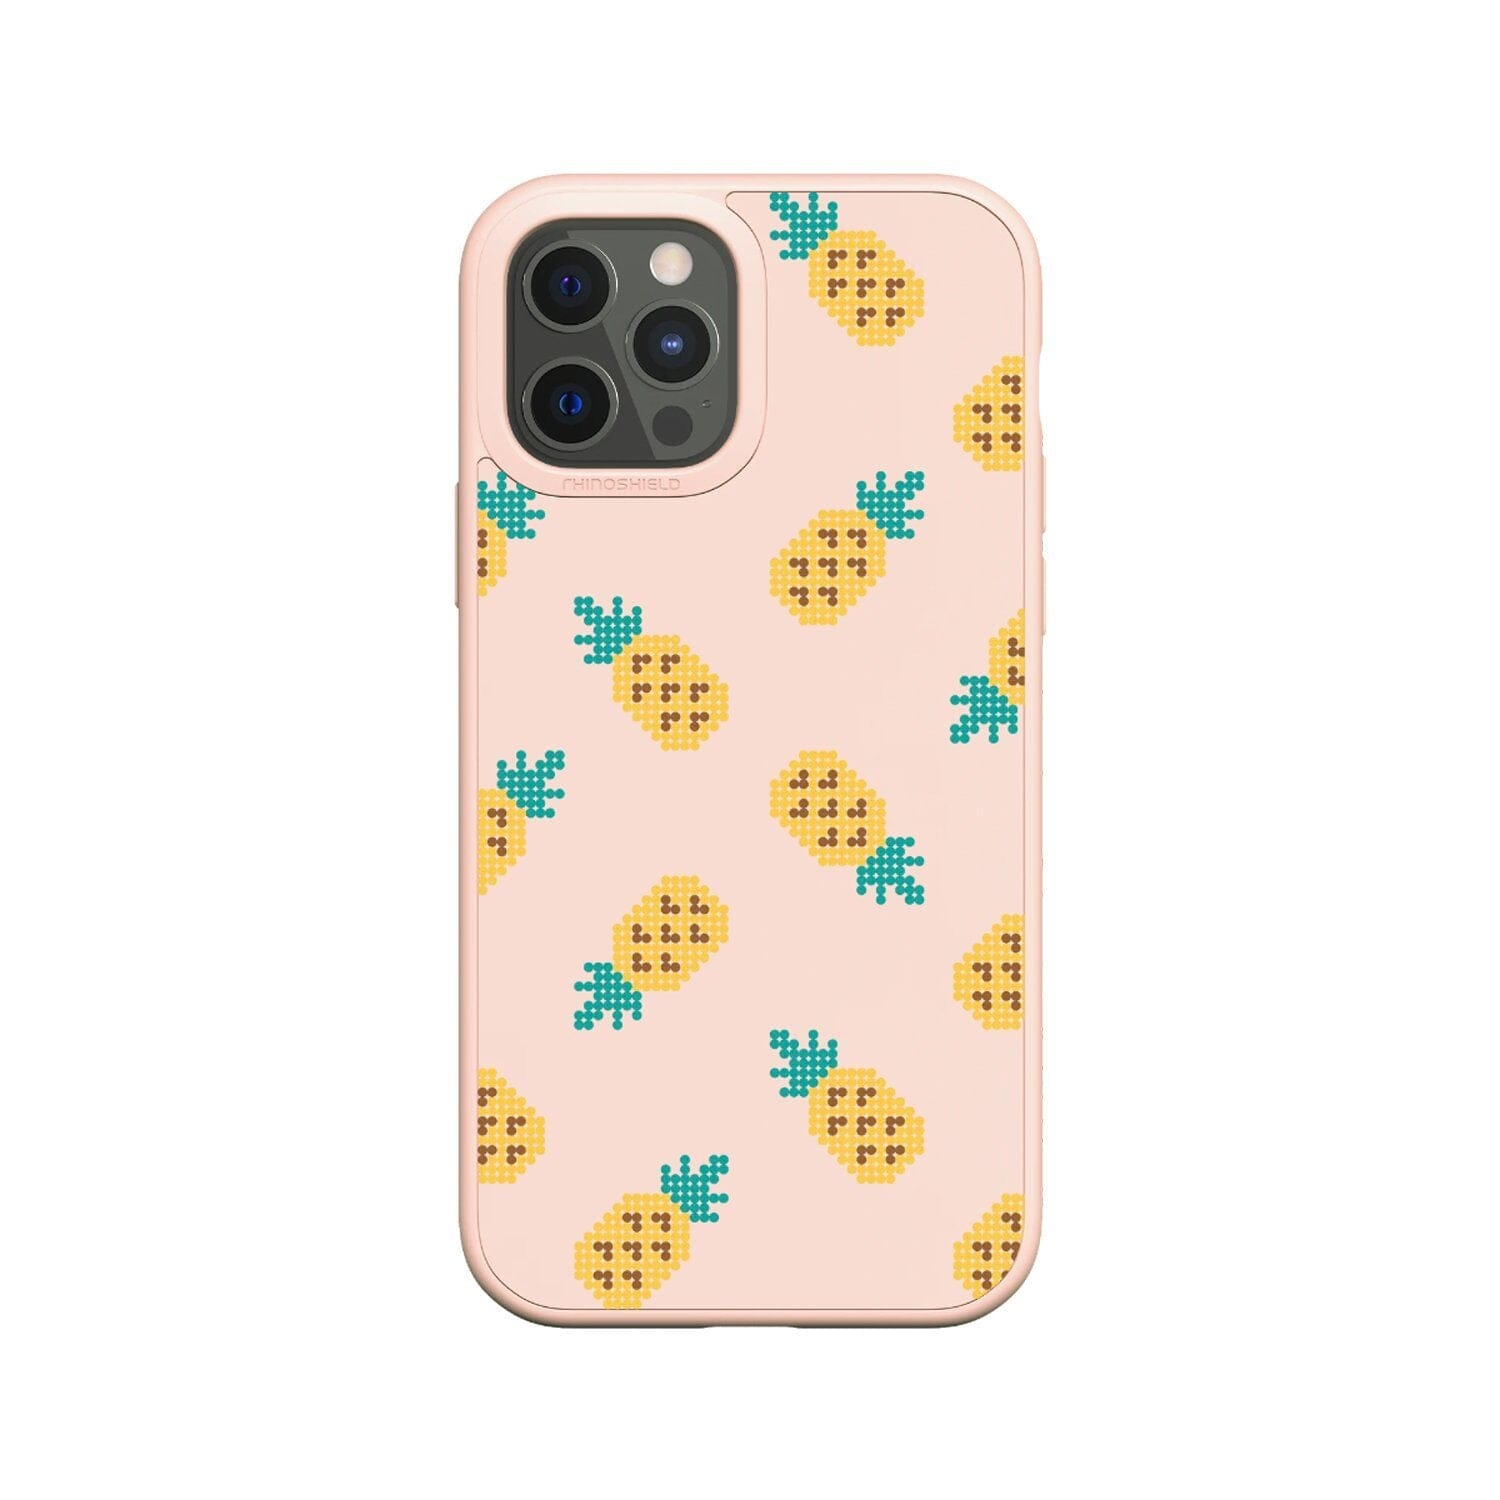 RhinoShield SolidSuit Design Case for iPhone 12 Series (2020) Default RhinoShield iPhone 12 Pro Max 6.7" Pink/I Have A Pineapple 